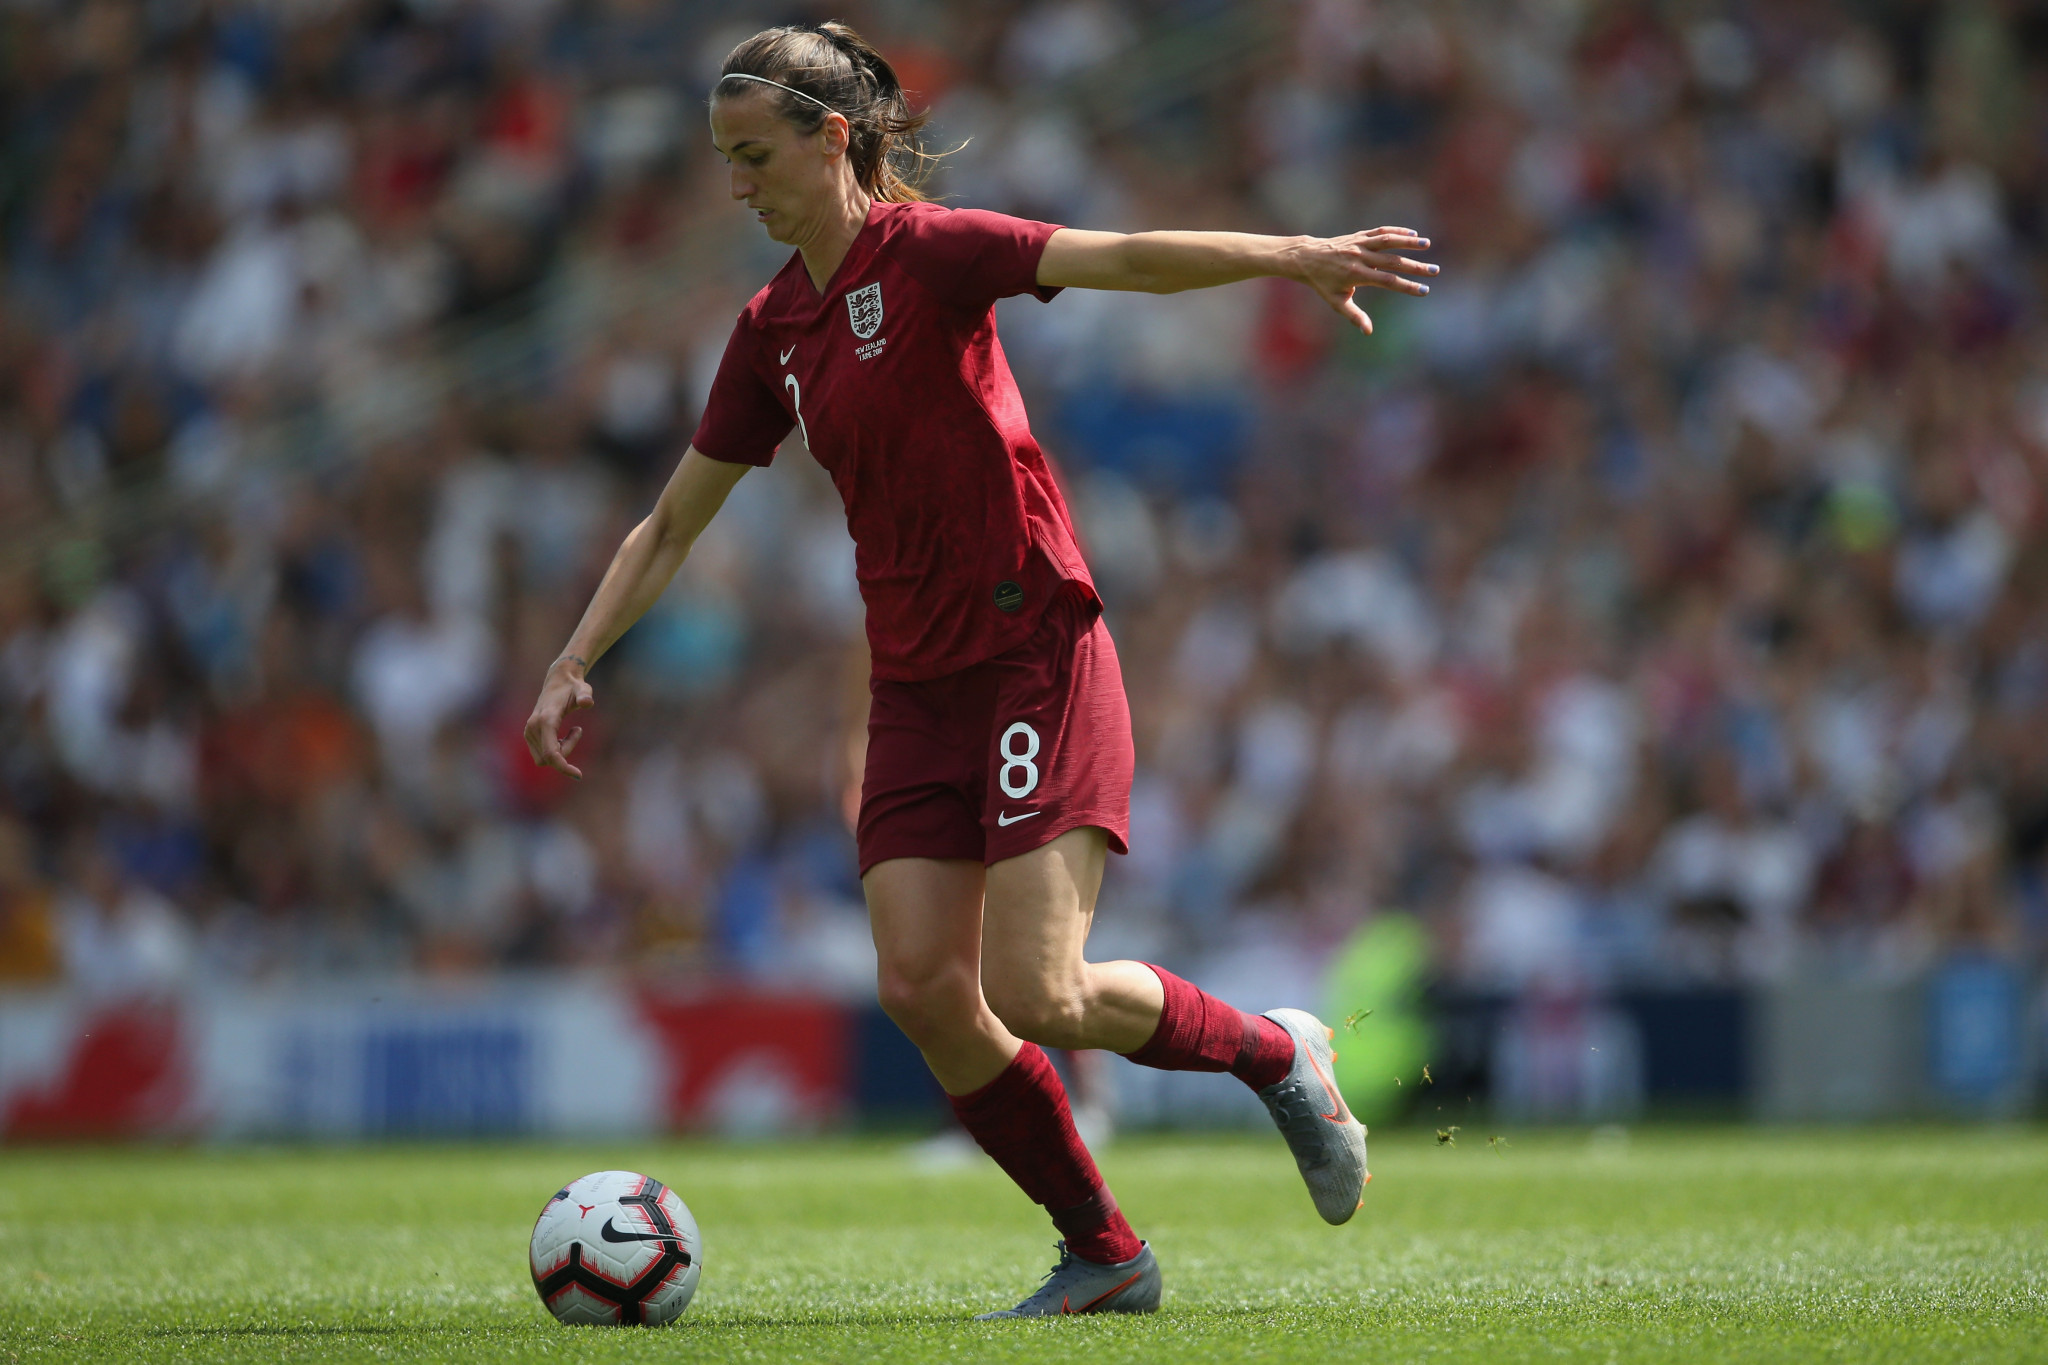 The FIFA Women's World Cup continues tomorrow, with matches including a clash between England and Scotland in Group D ©Getty Images